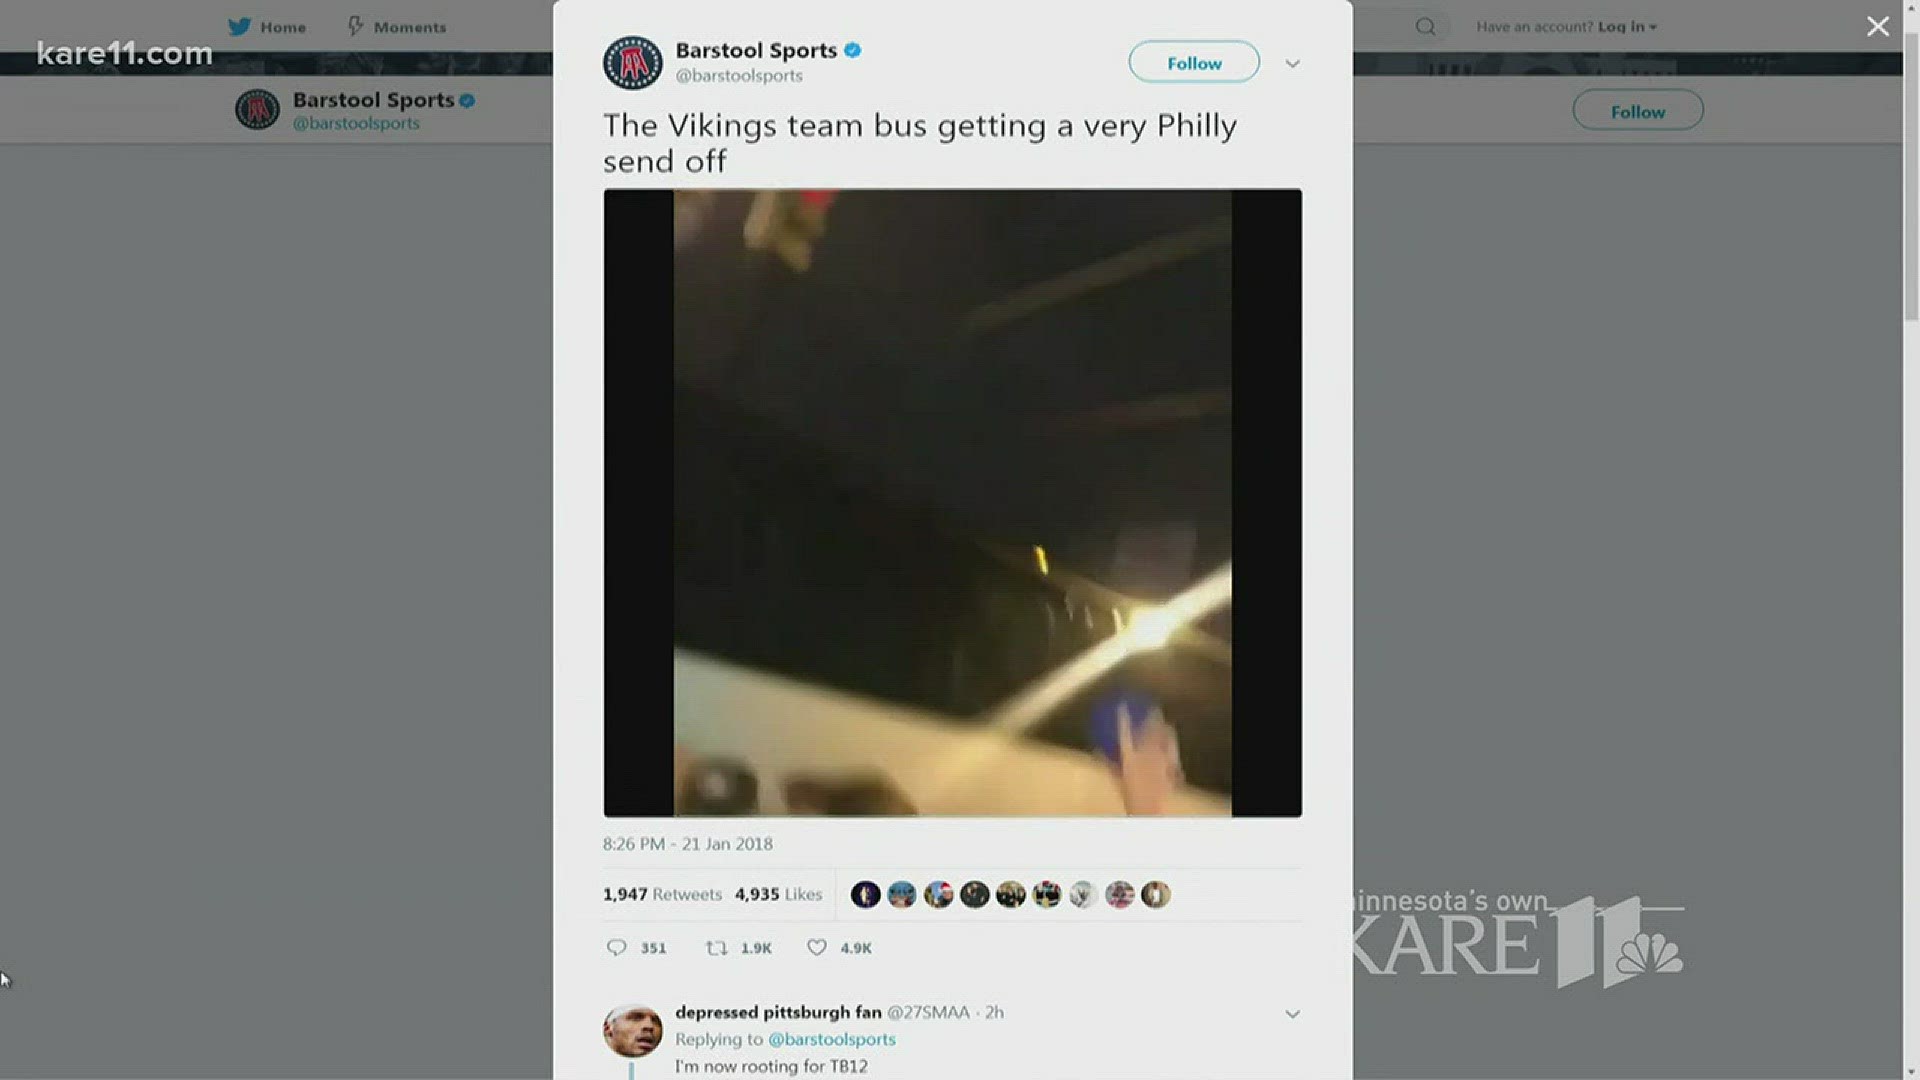 Eagles fans were caught on video throwing beer cans and bottles at Vikings fans, and the team bus, before and after the game. http://kare11.tv/2mYbaqw